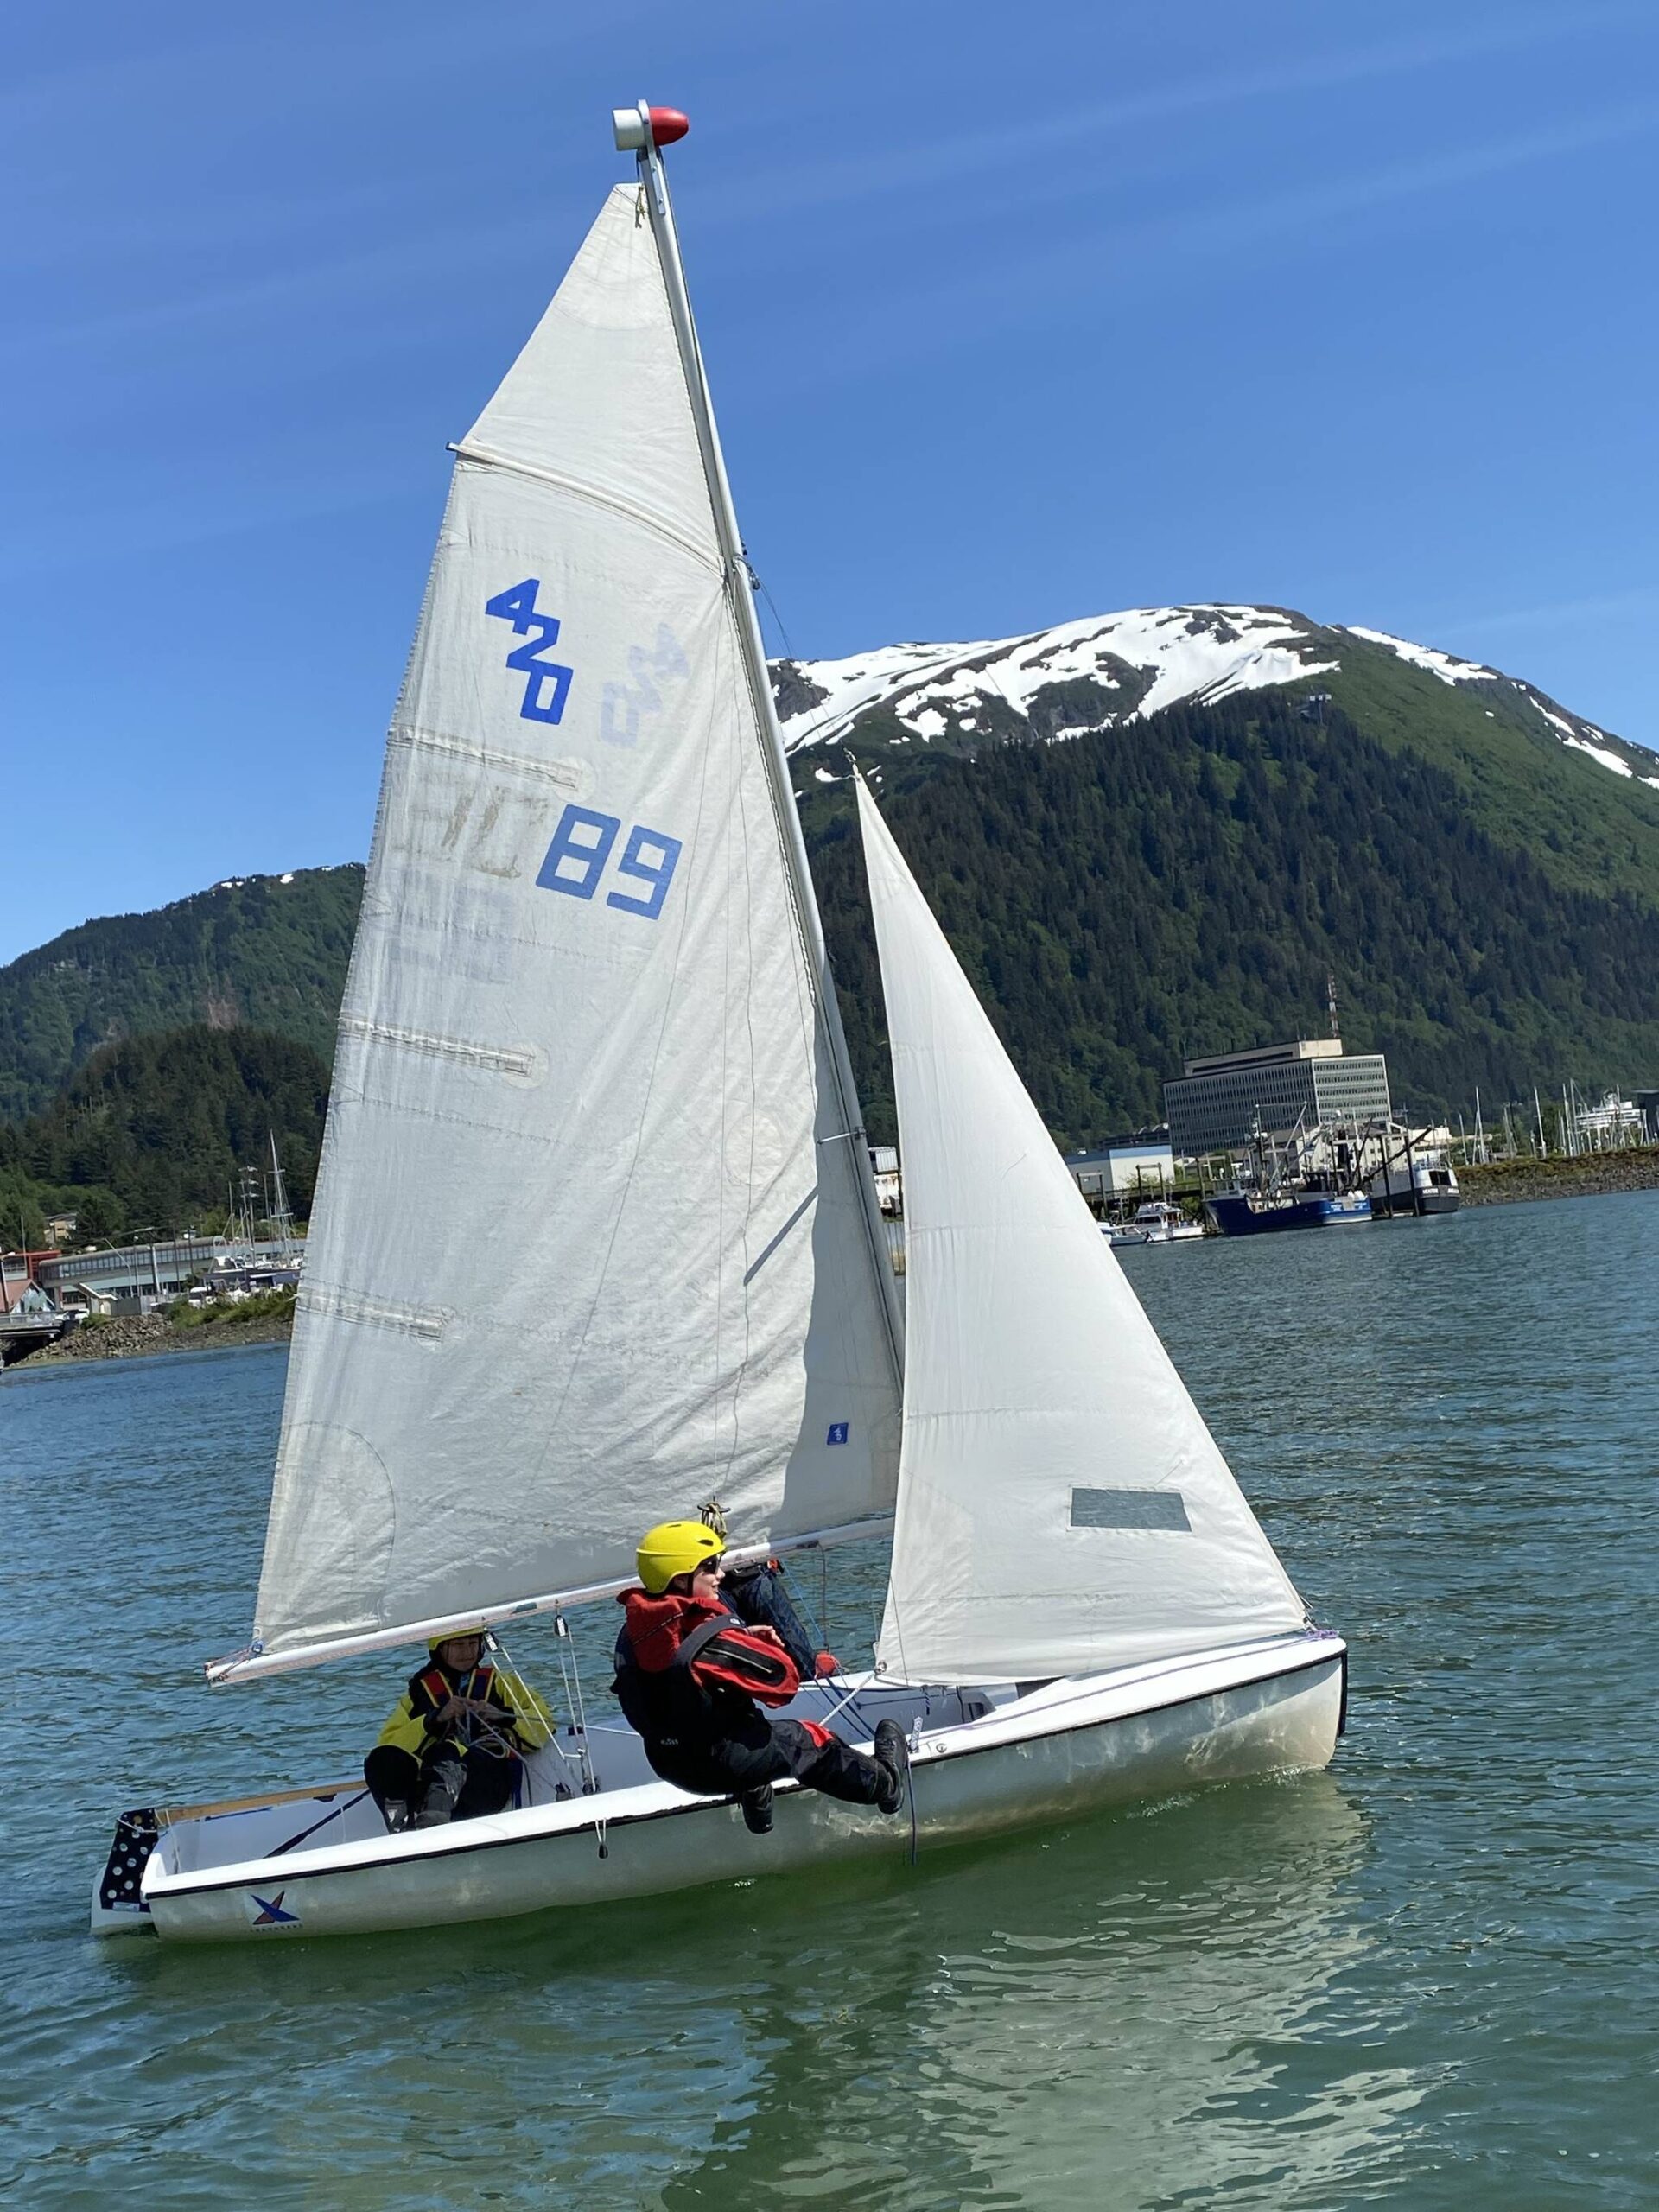 Jack Adams, 15, Lua Mangaccat, 15, and Sigrid Eller, 13, sail within view of downtown Juneau and the surrounding mountains during a Juneau Youth Sailing course this week. (Photo by Adrian Whitney)